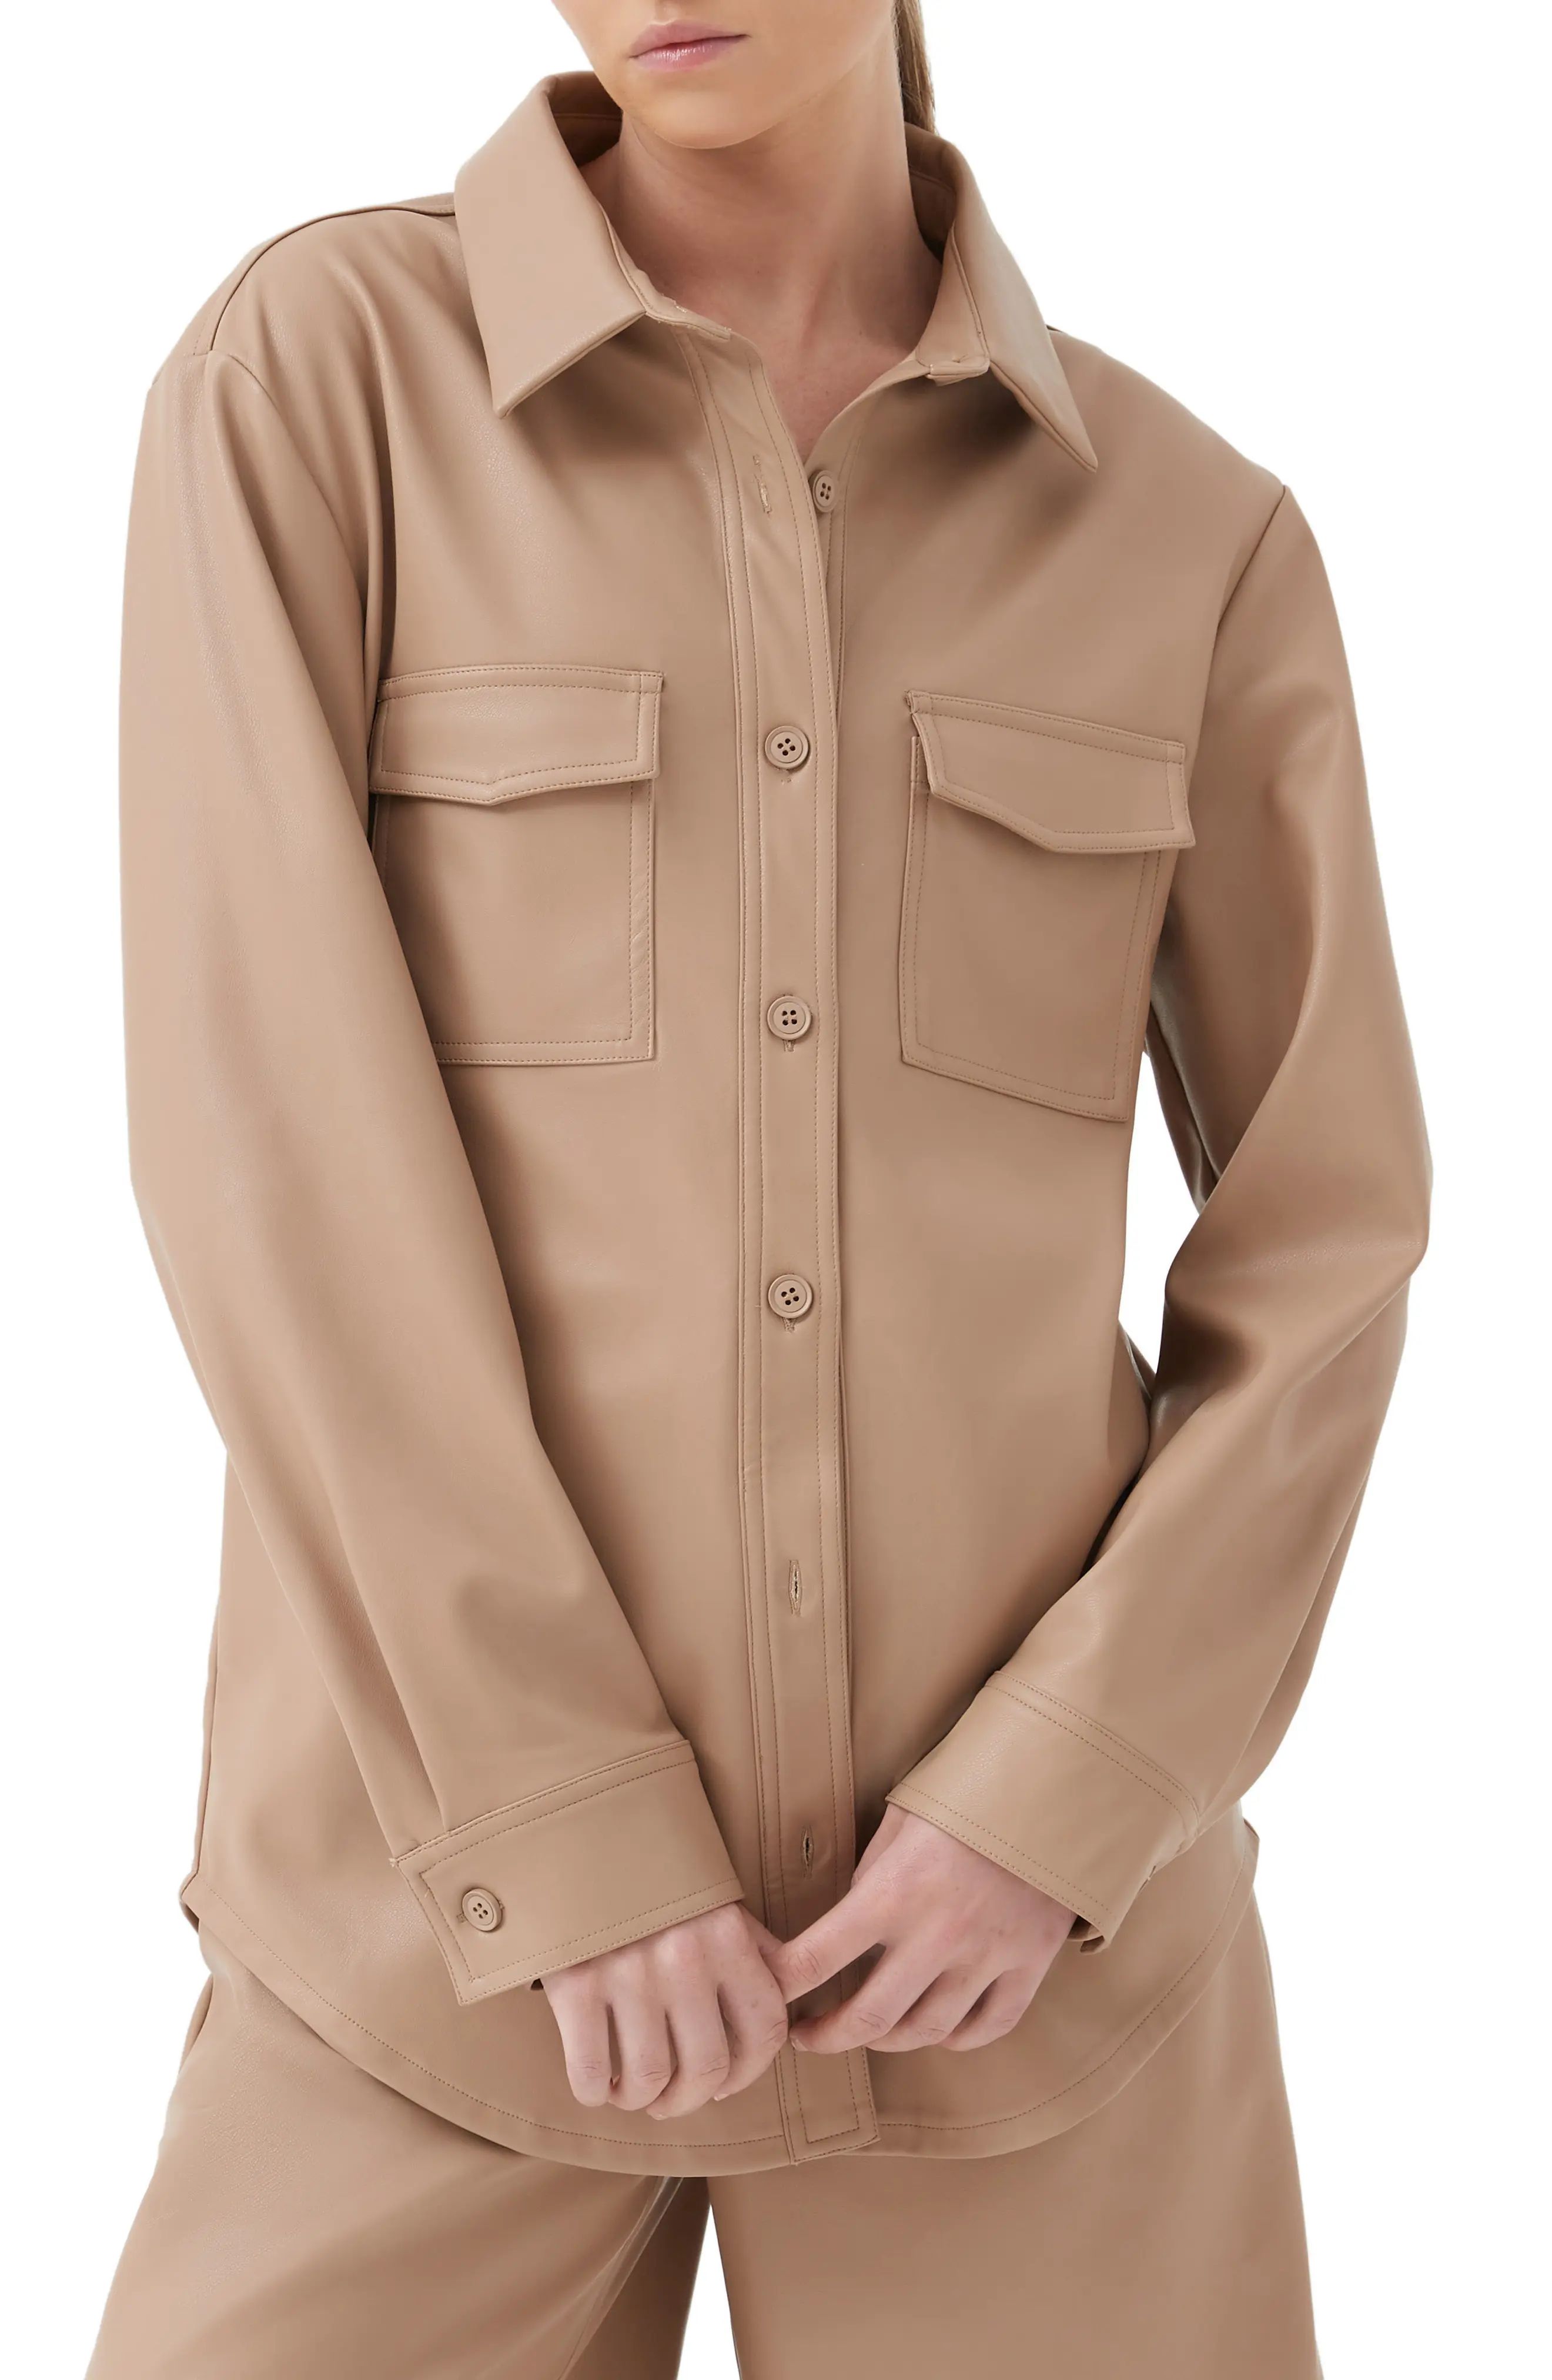 4th & Reckless Lissa Faux Leather Button-Up Shirt, Size X-Small in Beige Vegan Leather at Nordstrom | Nordstrom